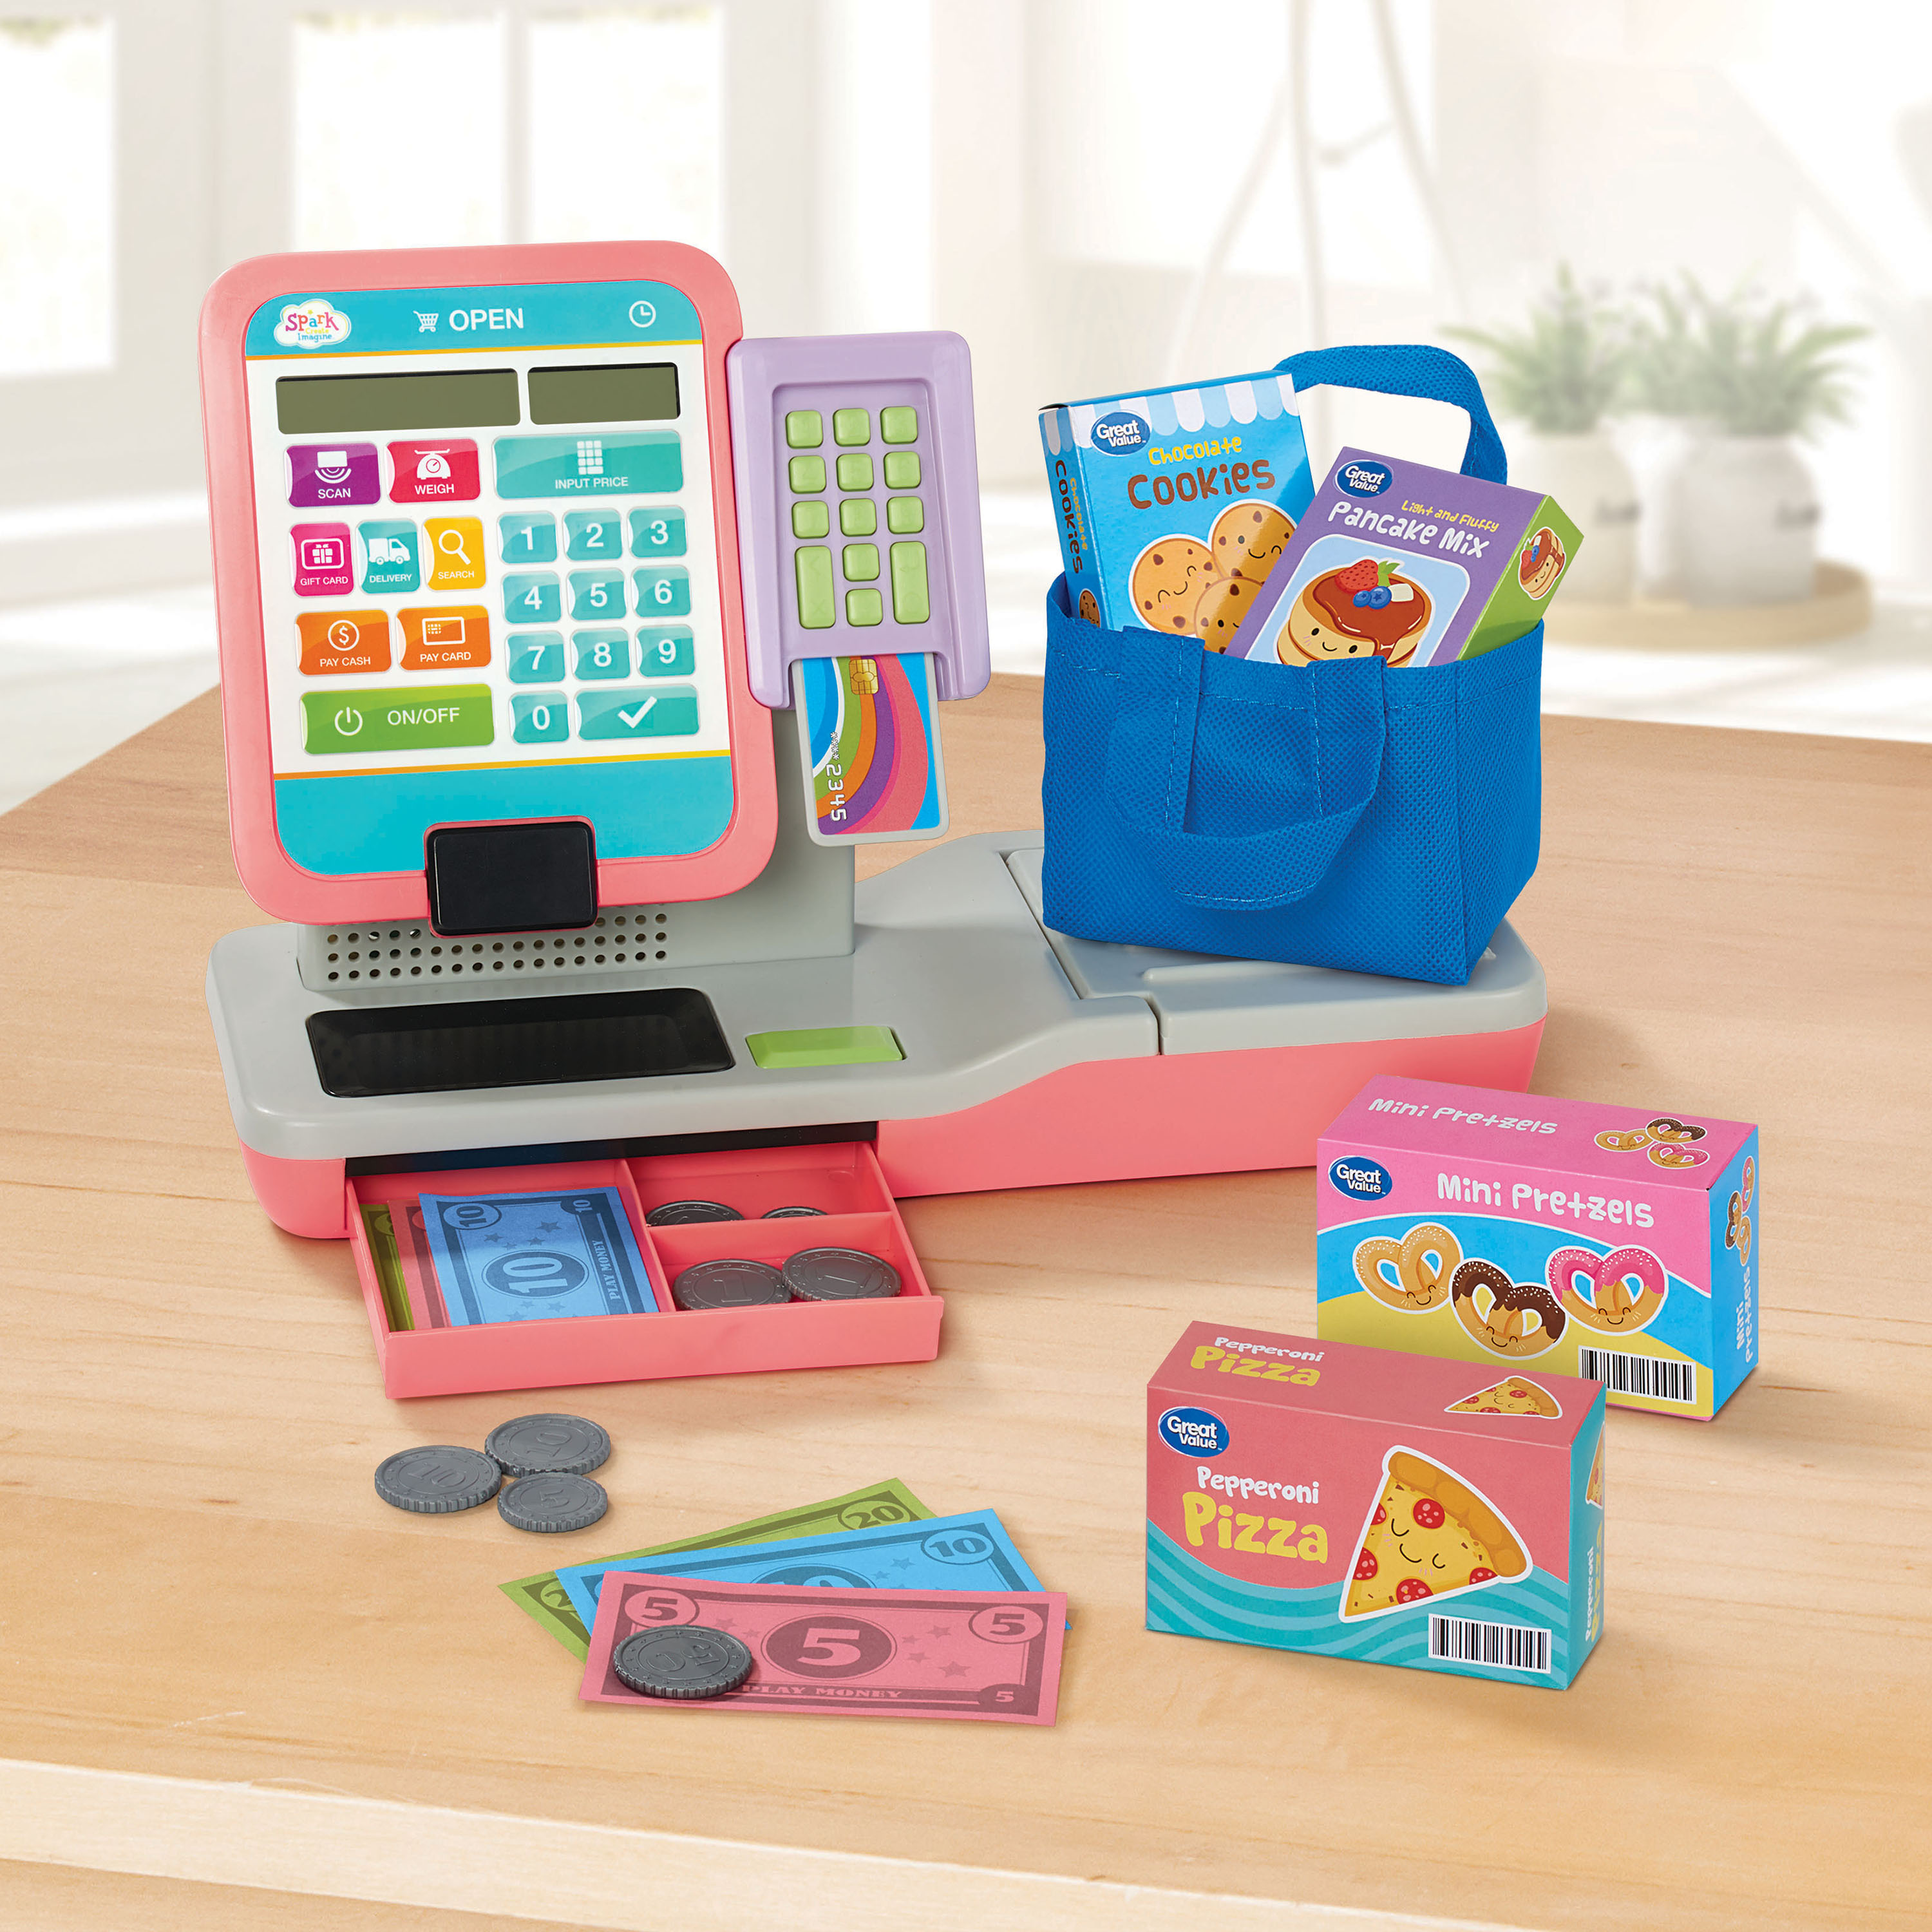 Spark Create Imagine Check Out Station Play Cash Register with Play Money, 21 Pieces - image 2 of 6